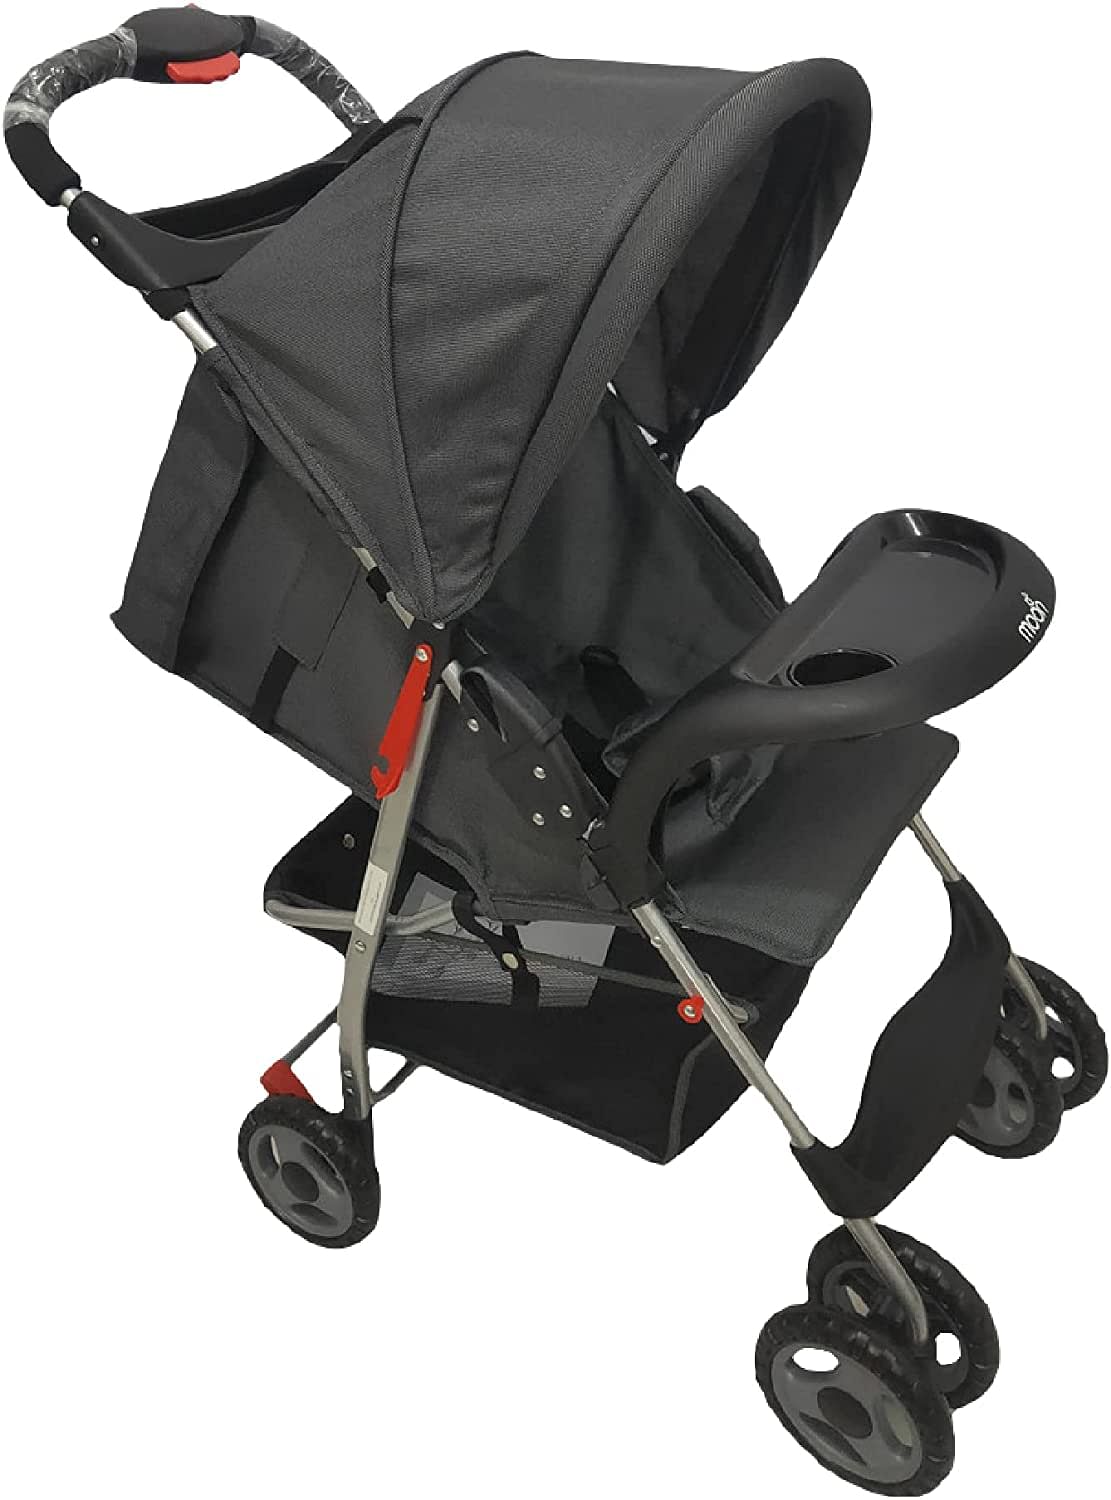 MOON Bezik One Hand Fold Travel Stroller/Pram Suitable for Newborn/Infant/Baby/Kids with Dual Tray| Leg Rest | Multi-Postion Reclining Seat Suitable For 0 Months+ (Upto 24 Kg) -Black + Grey